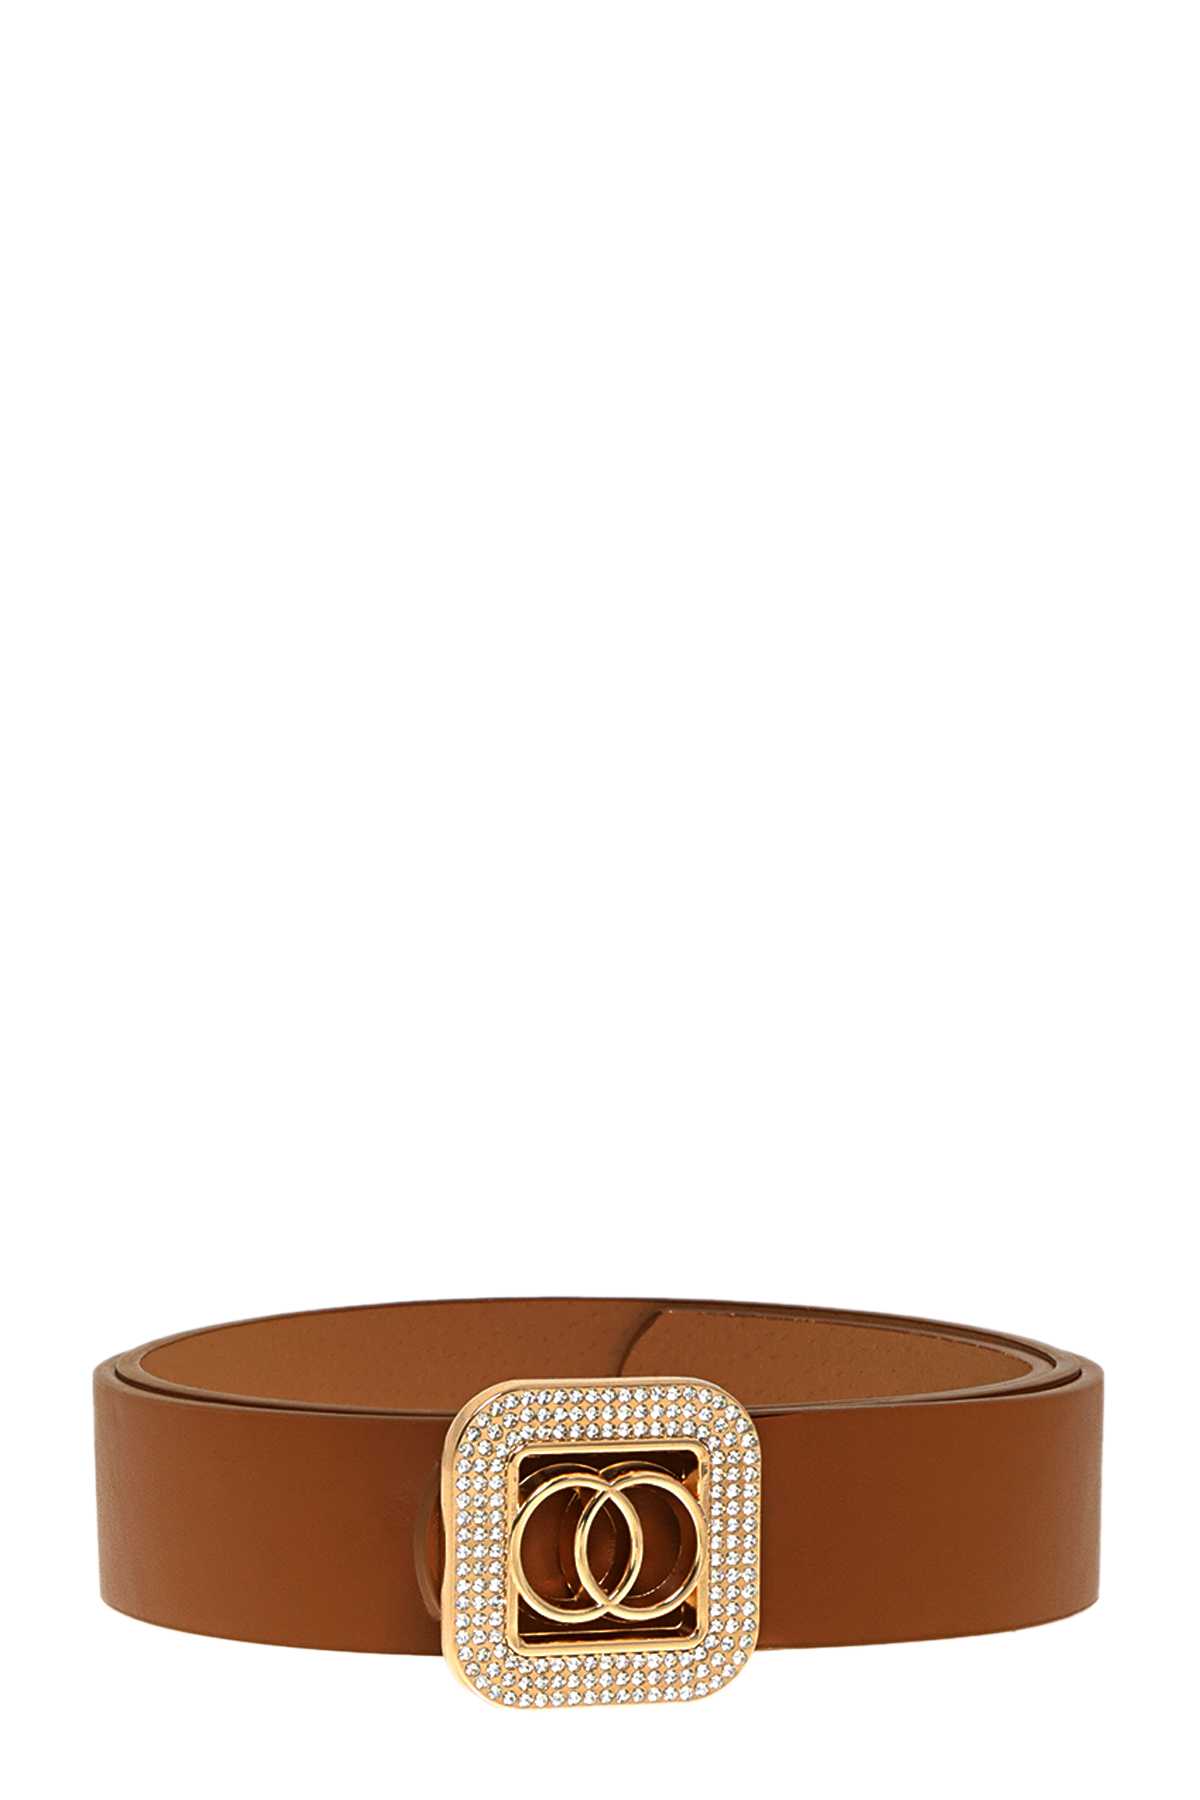 Linked Ring on Rhinestone Accented Square Buckle Belt